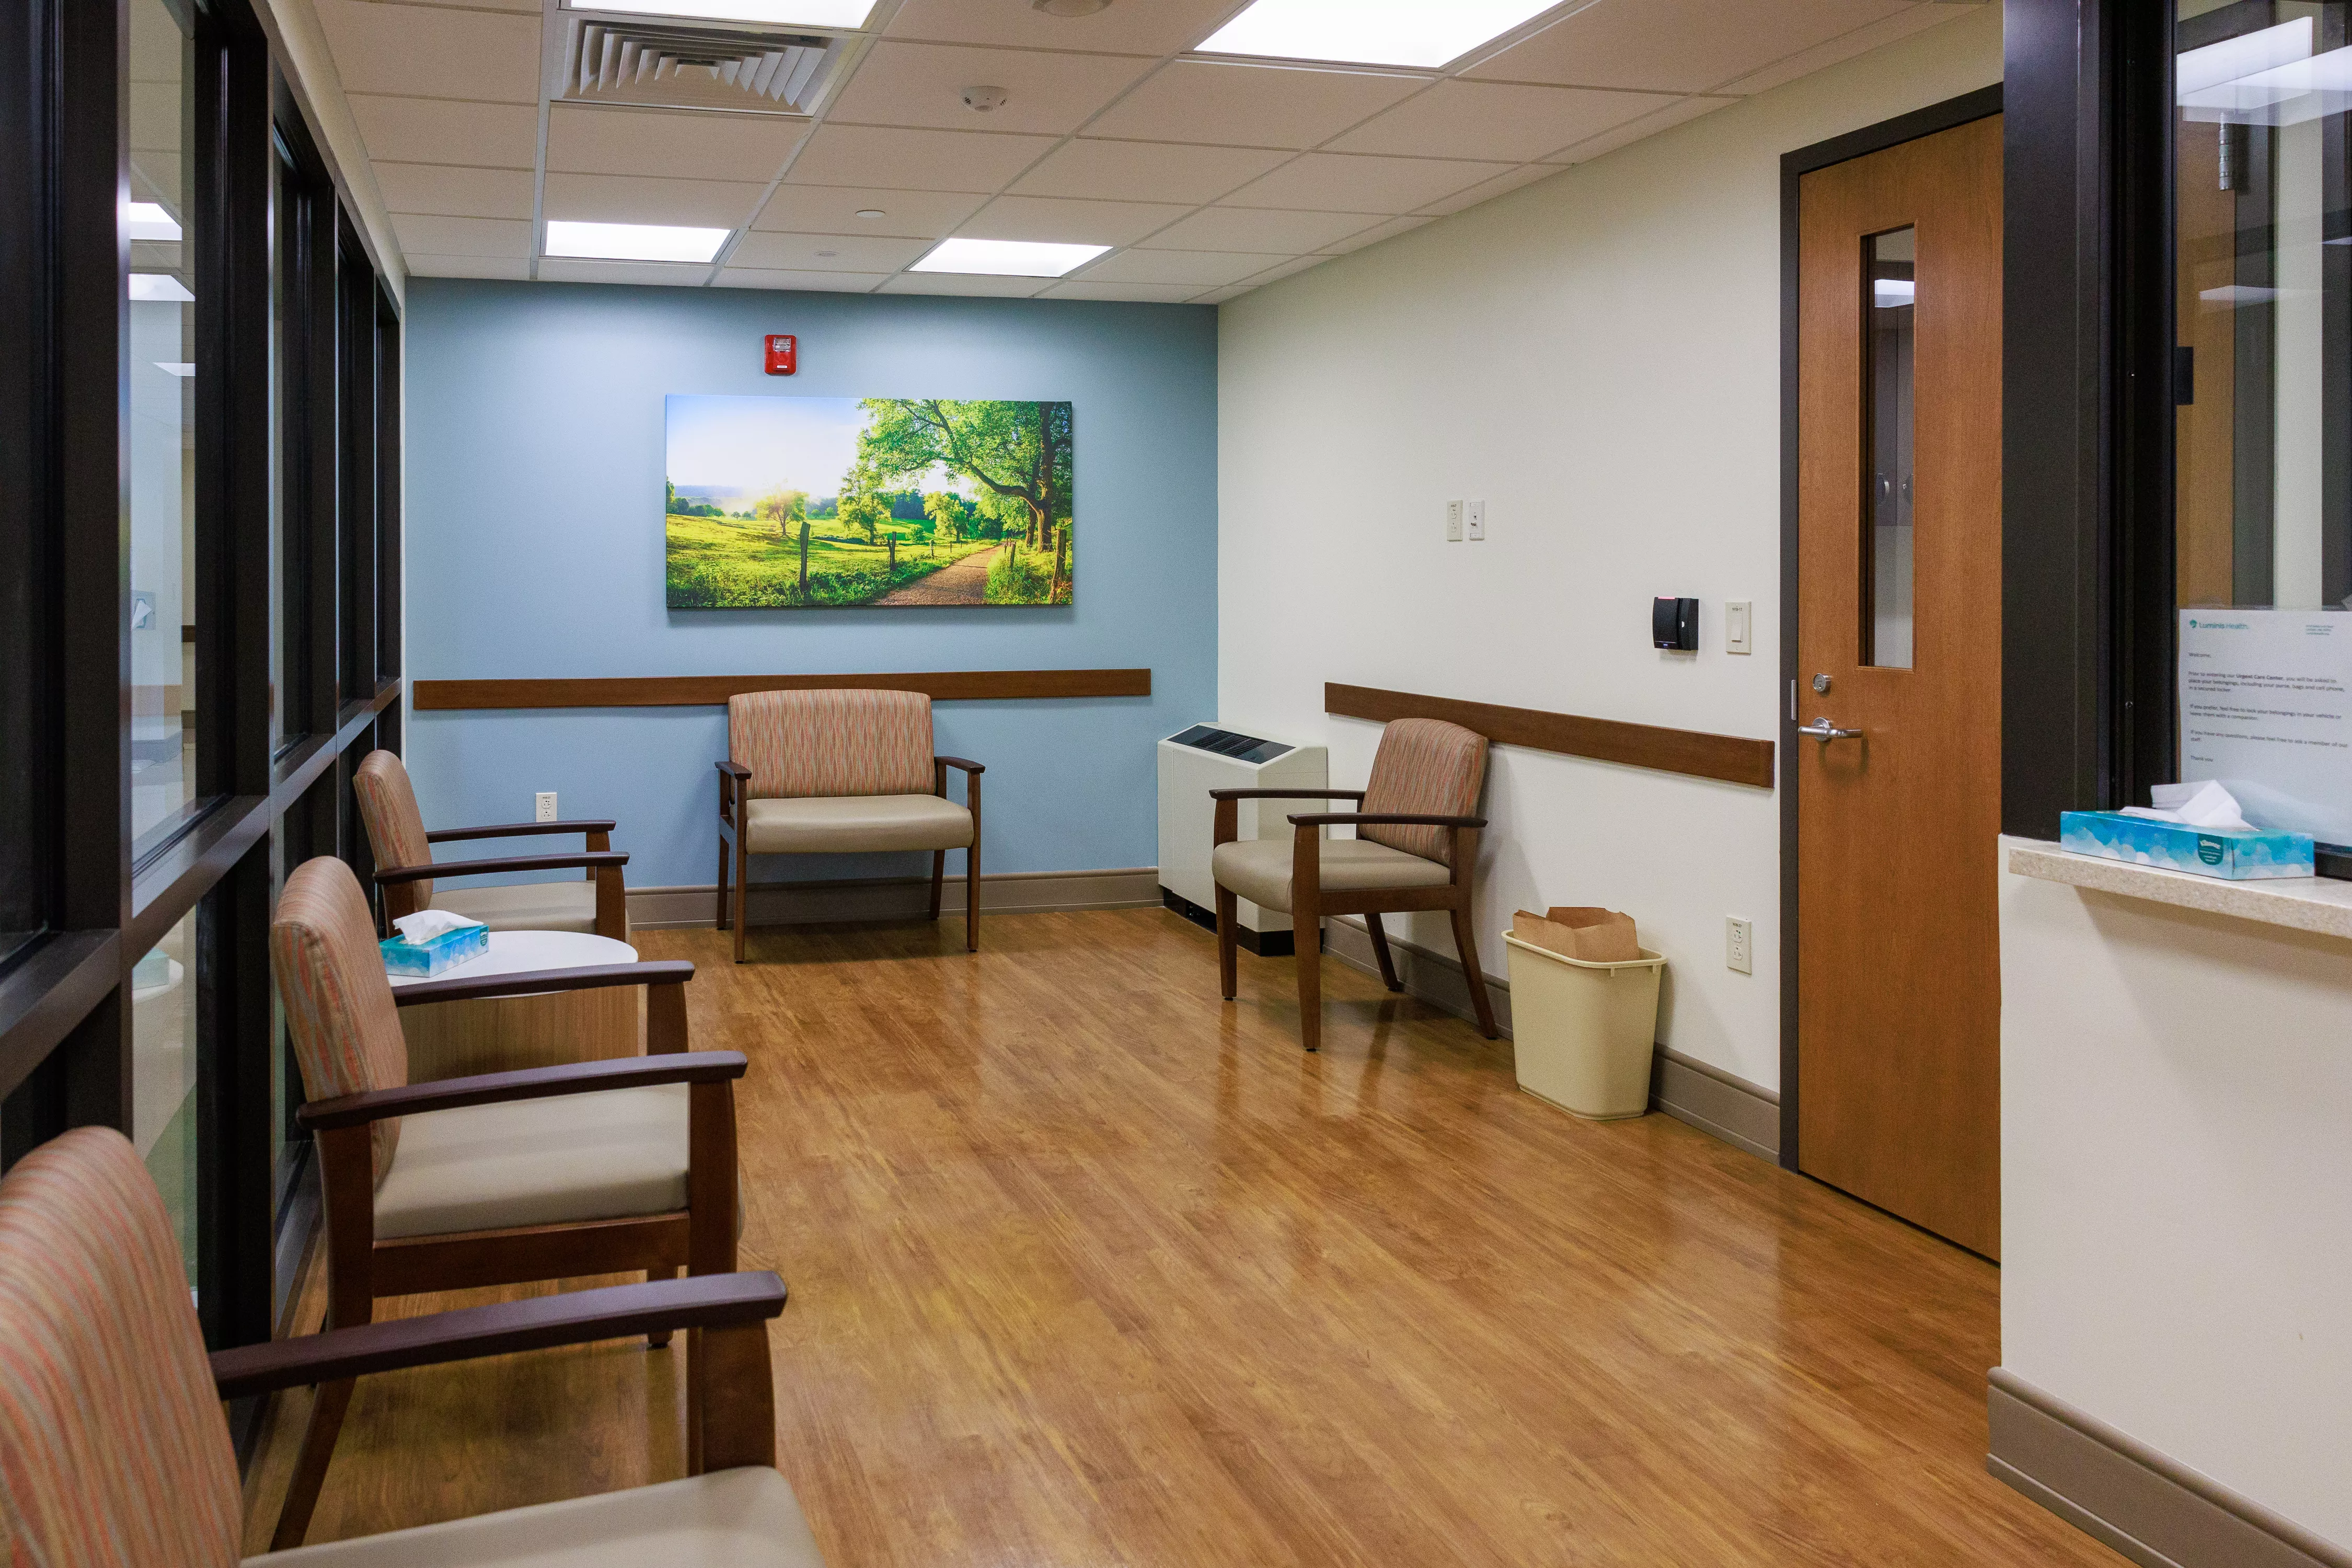 Seating in the Outpatient Walk-in Waiting Area